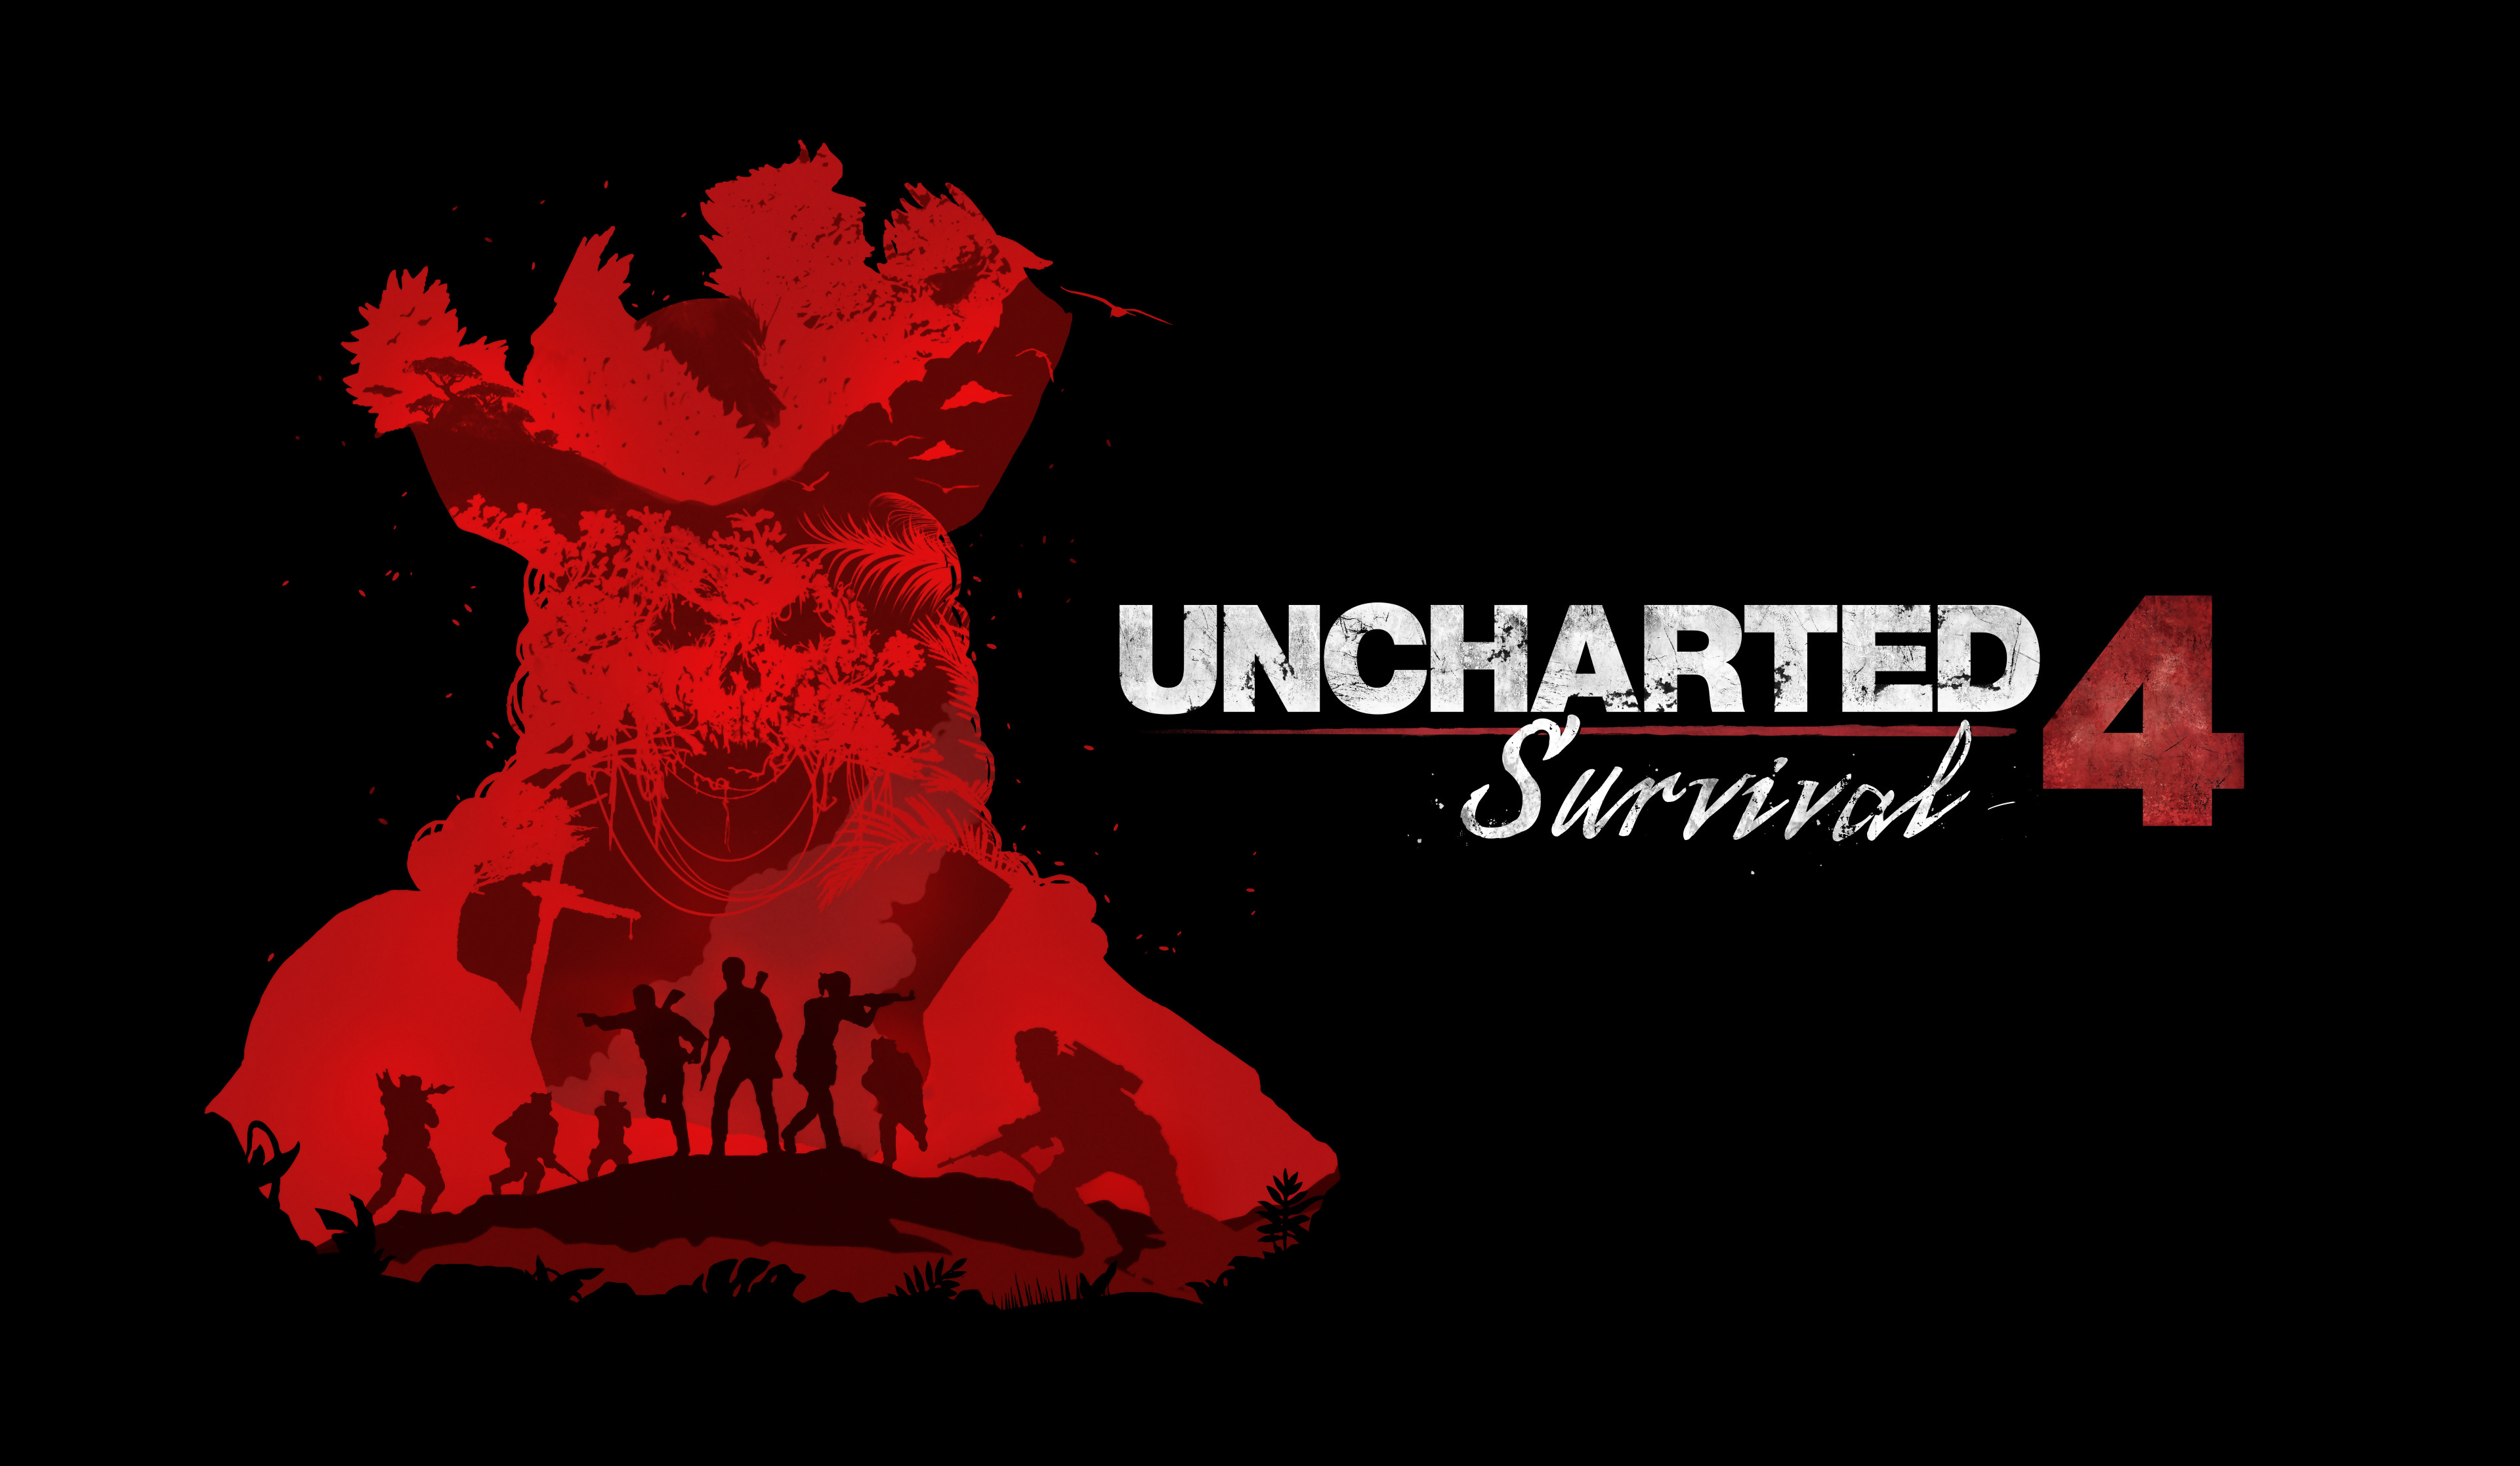 Uncharted 4: A Thief's End Survival